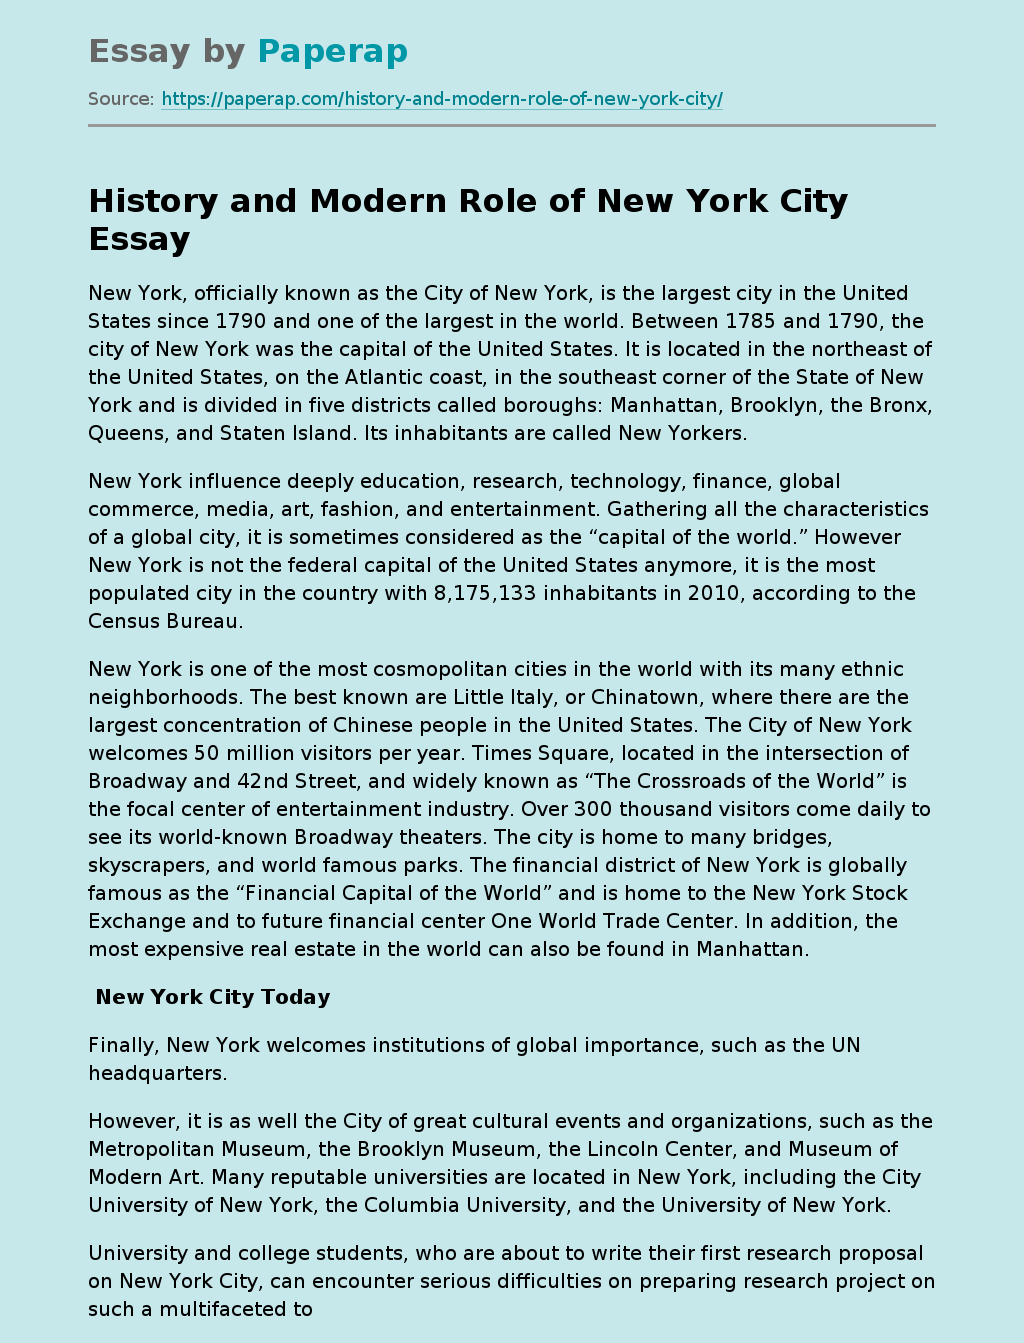 History and Modern Role of New York City